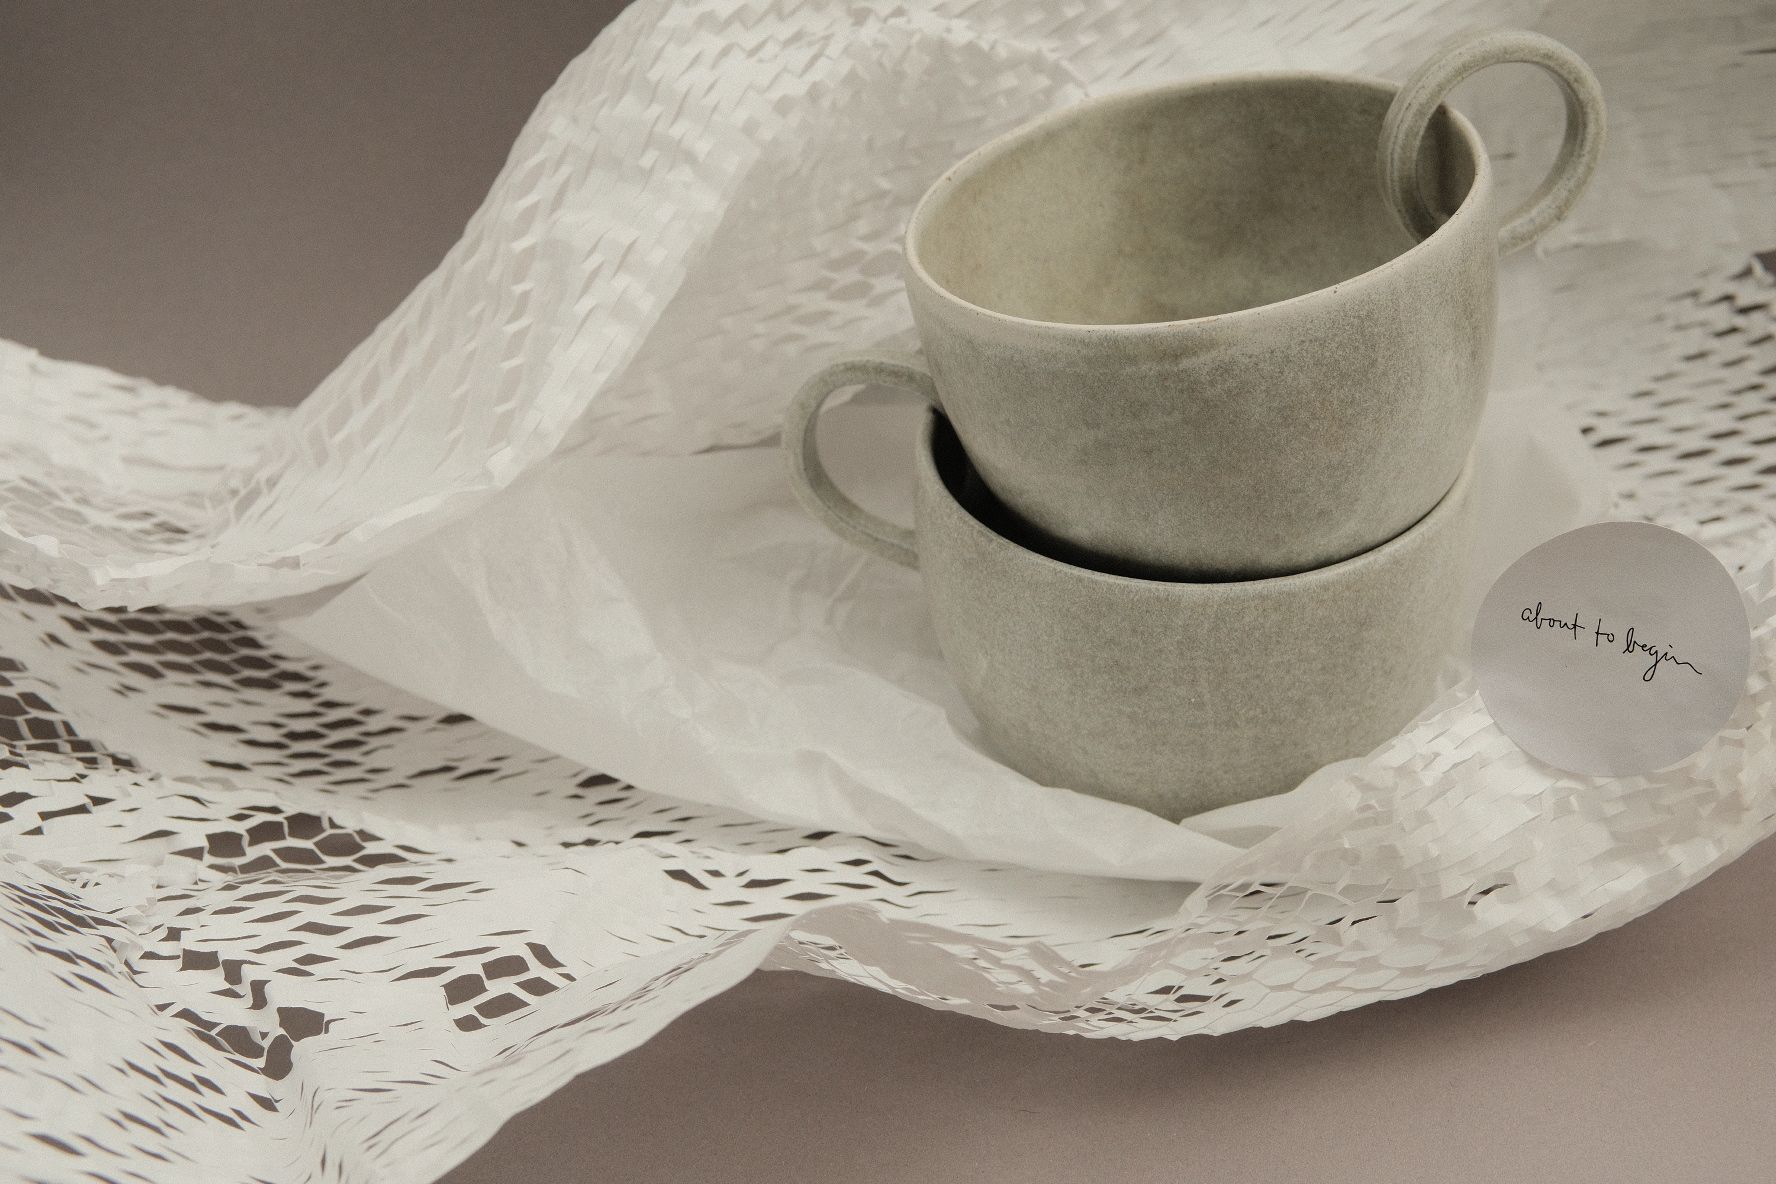 About To Begin: How A Ceramic Artist Turned Her Craft into a Circular Business